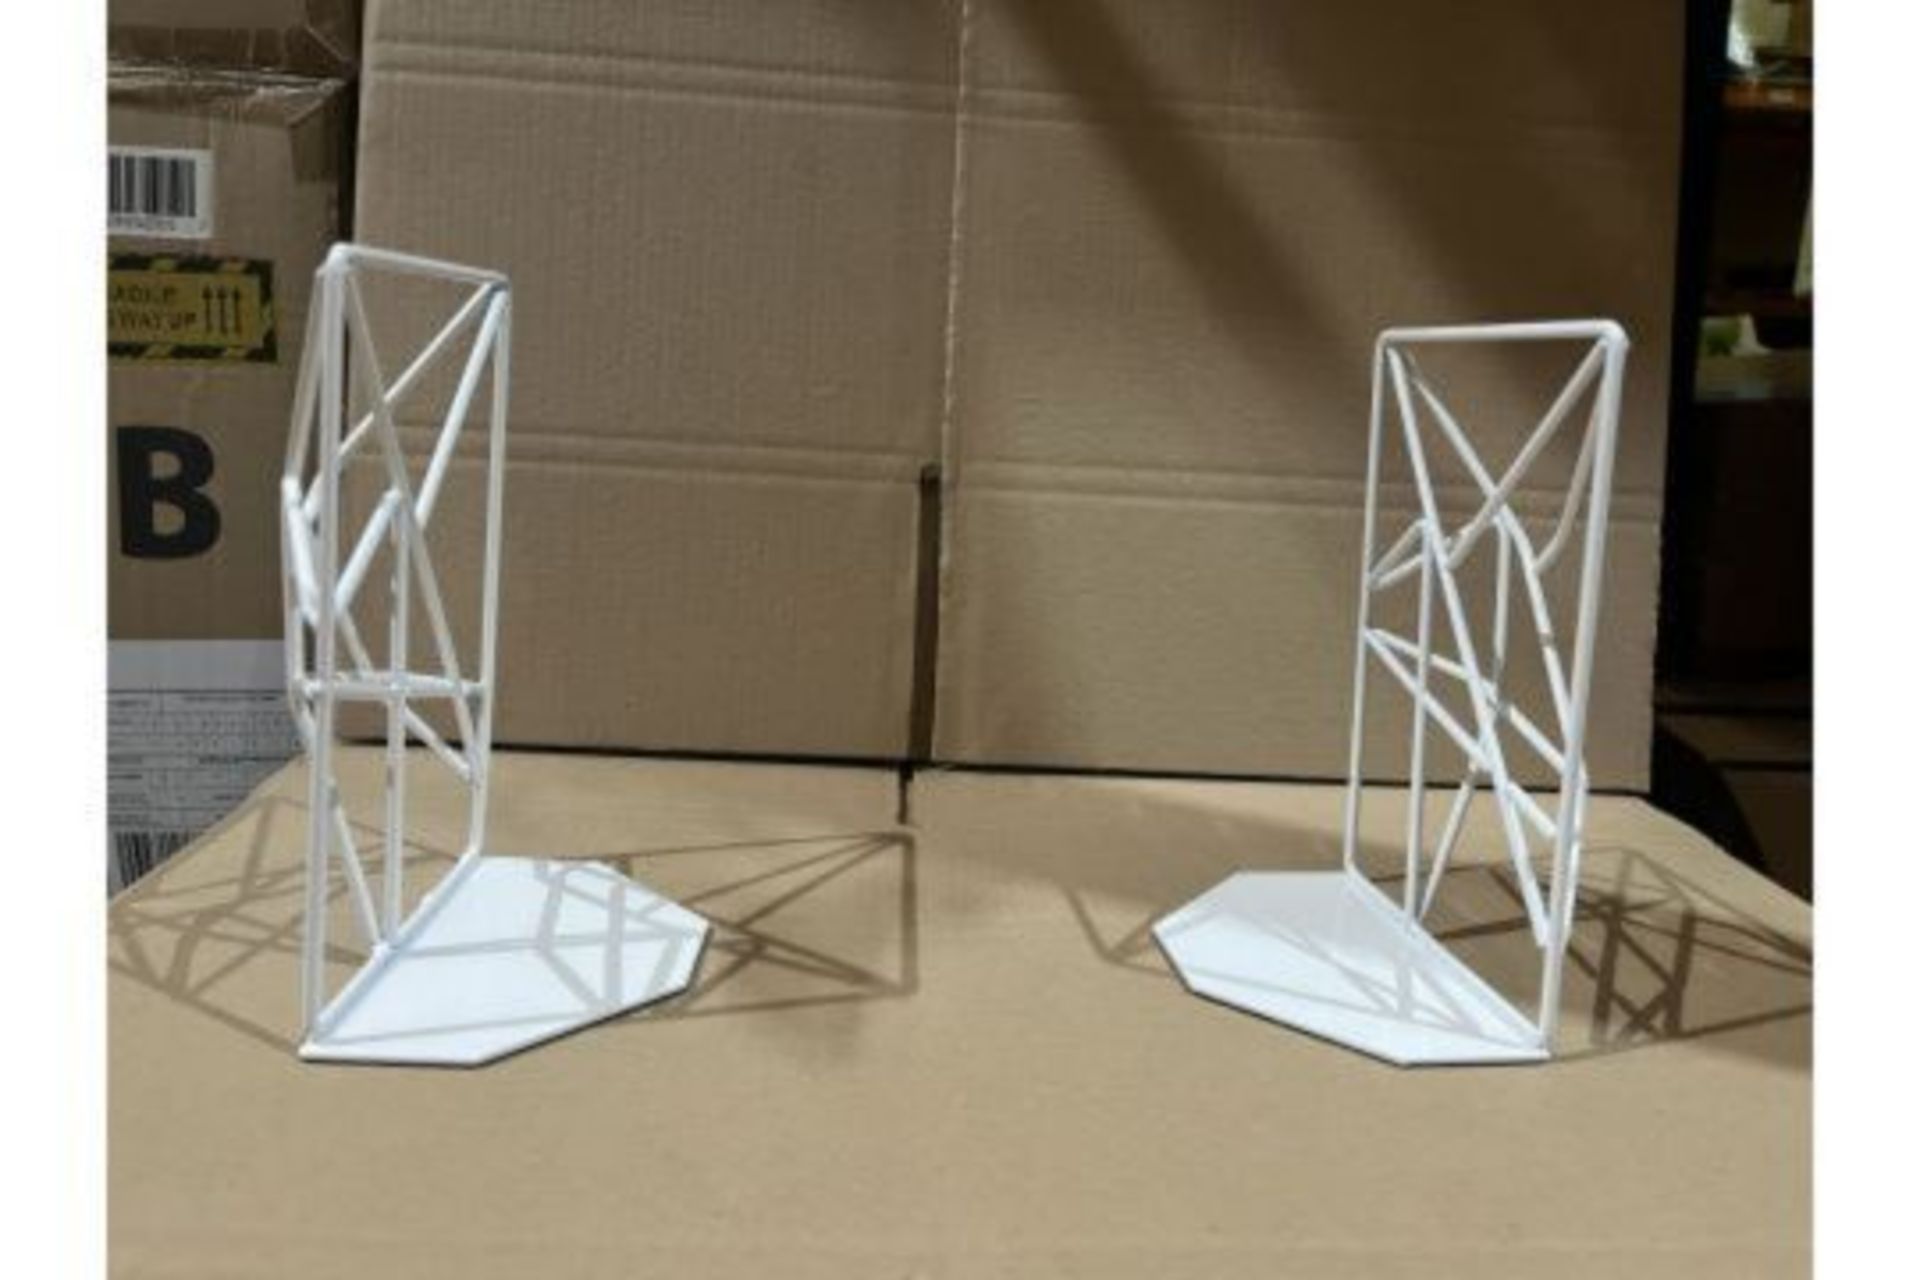 40 X BRAND NEW WHITE GEOMETRIC BOOK ENDS R9 - Image 2 of 2